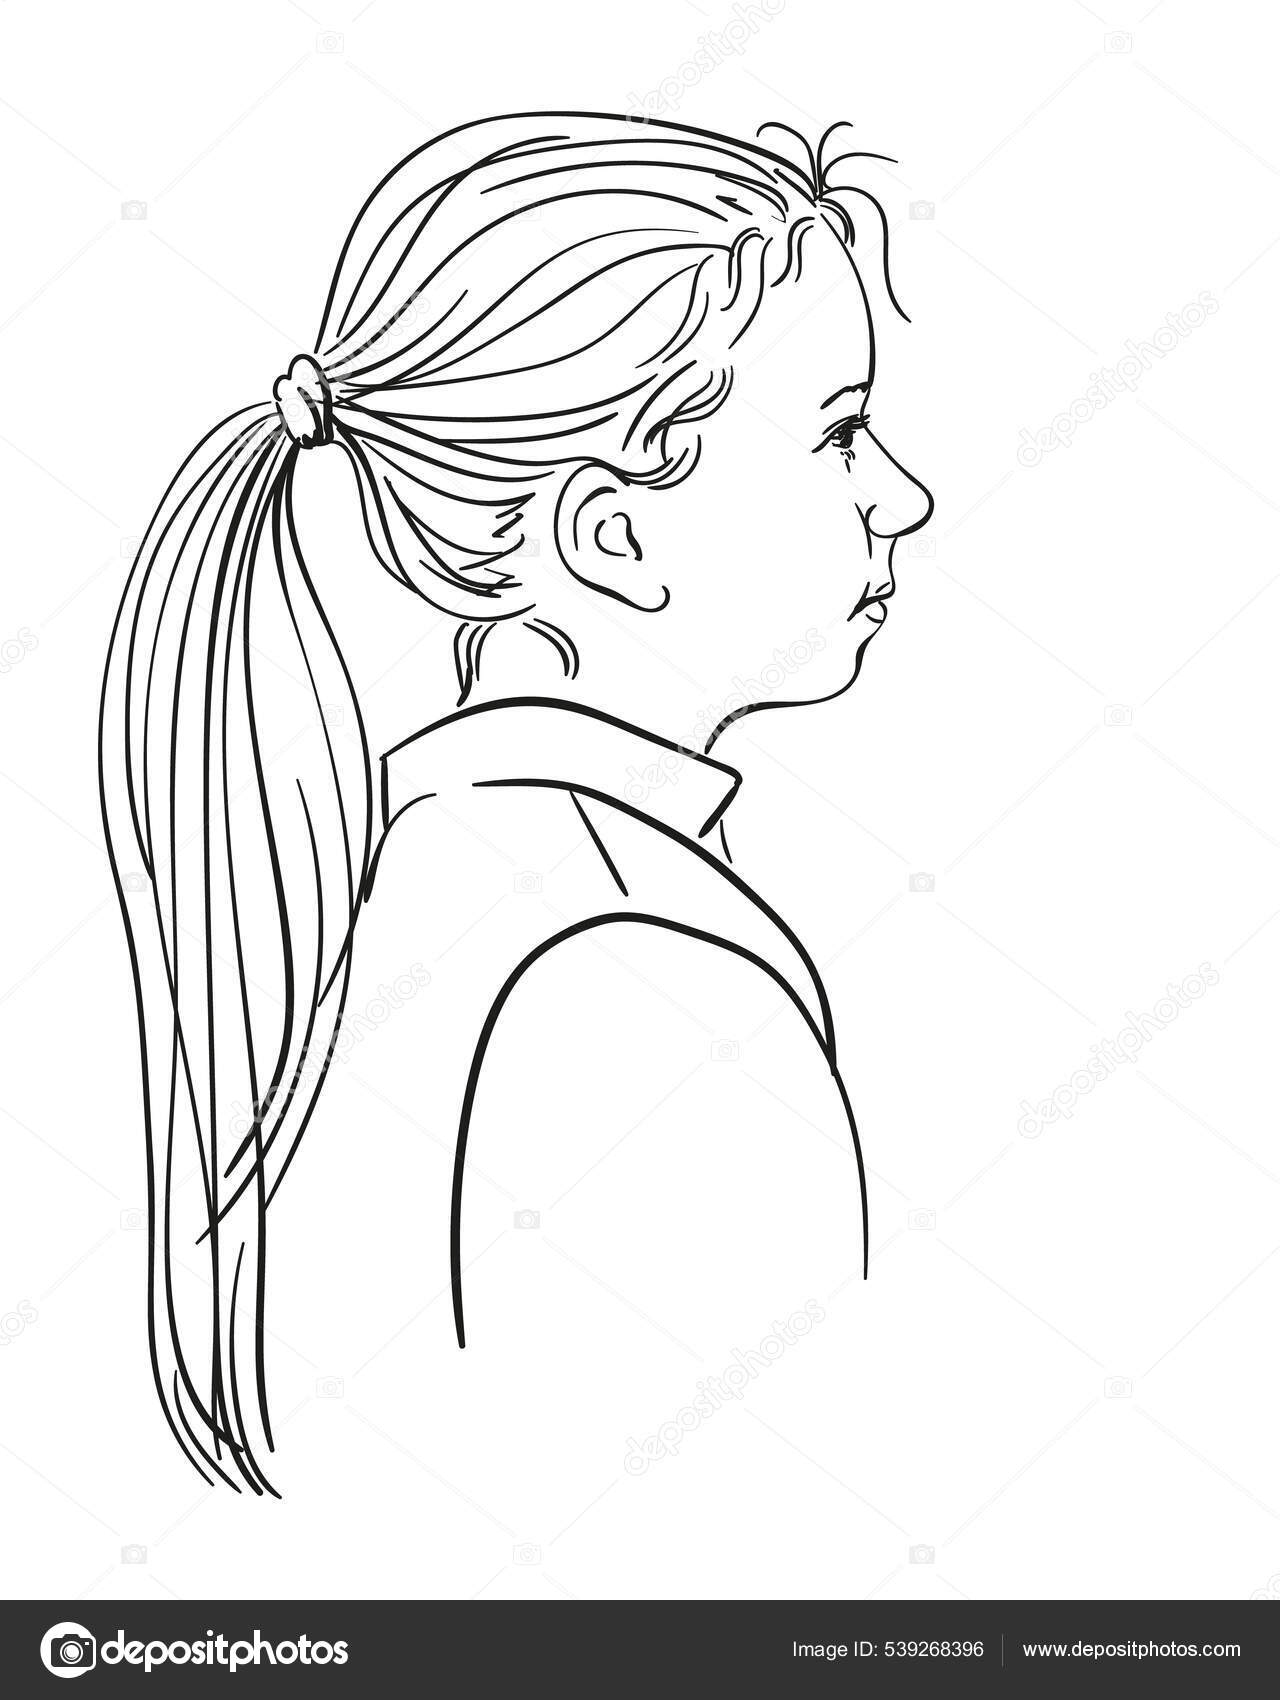 Freehand drawing teen girl with long hair Vector Image